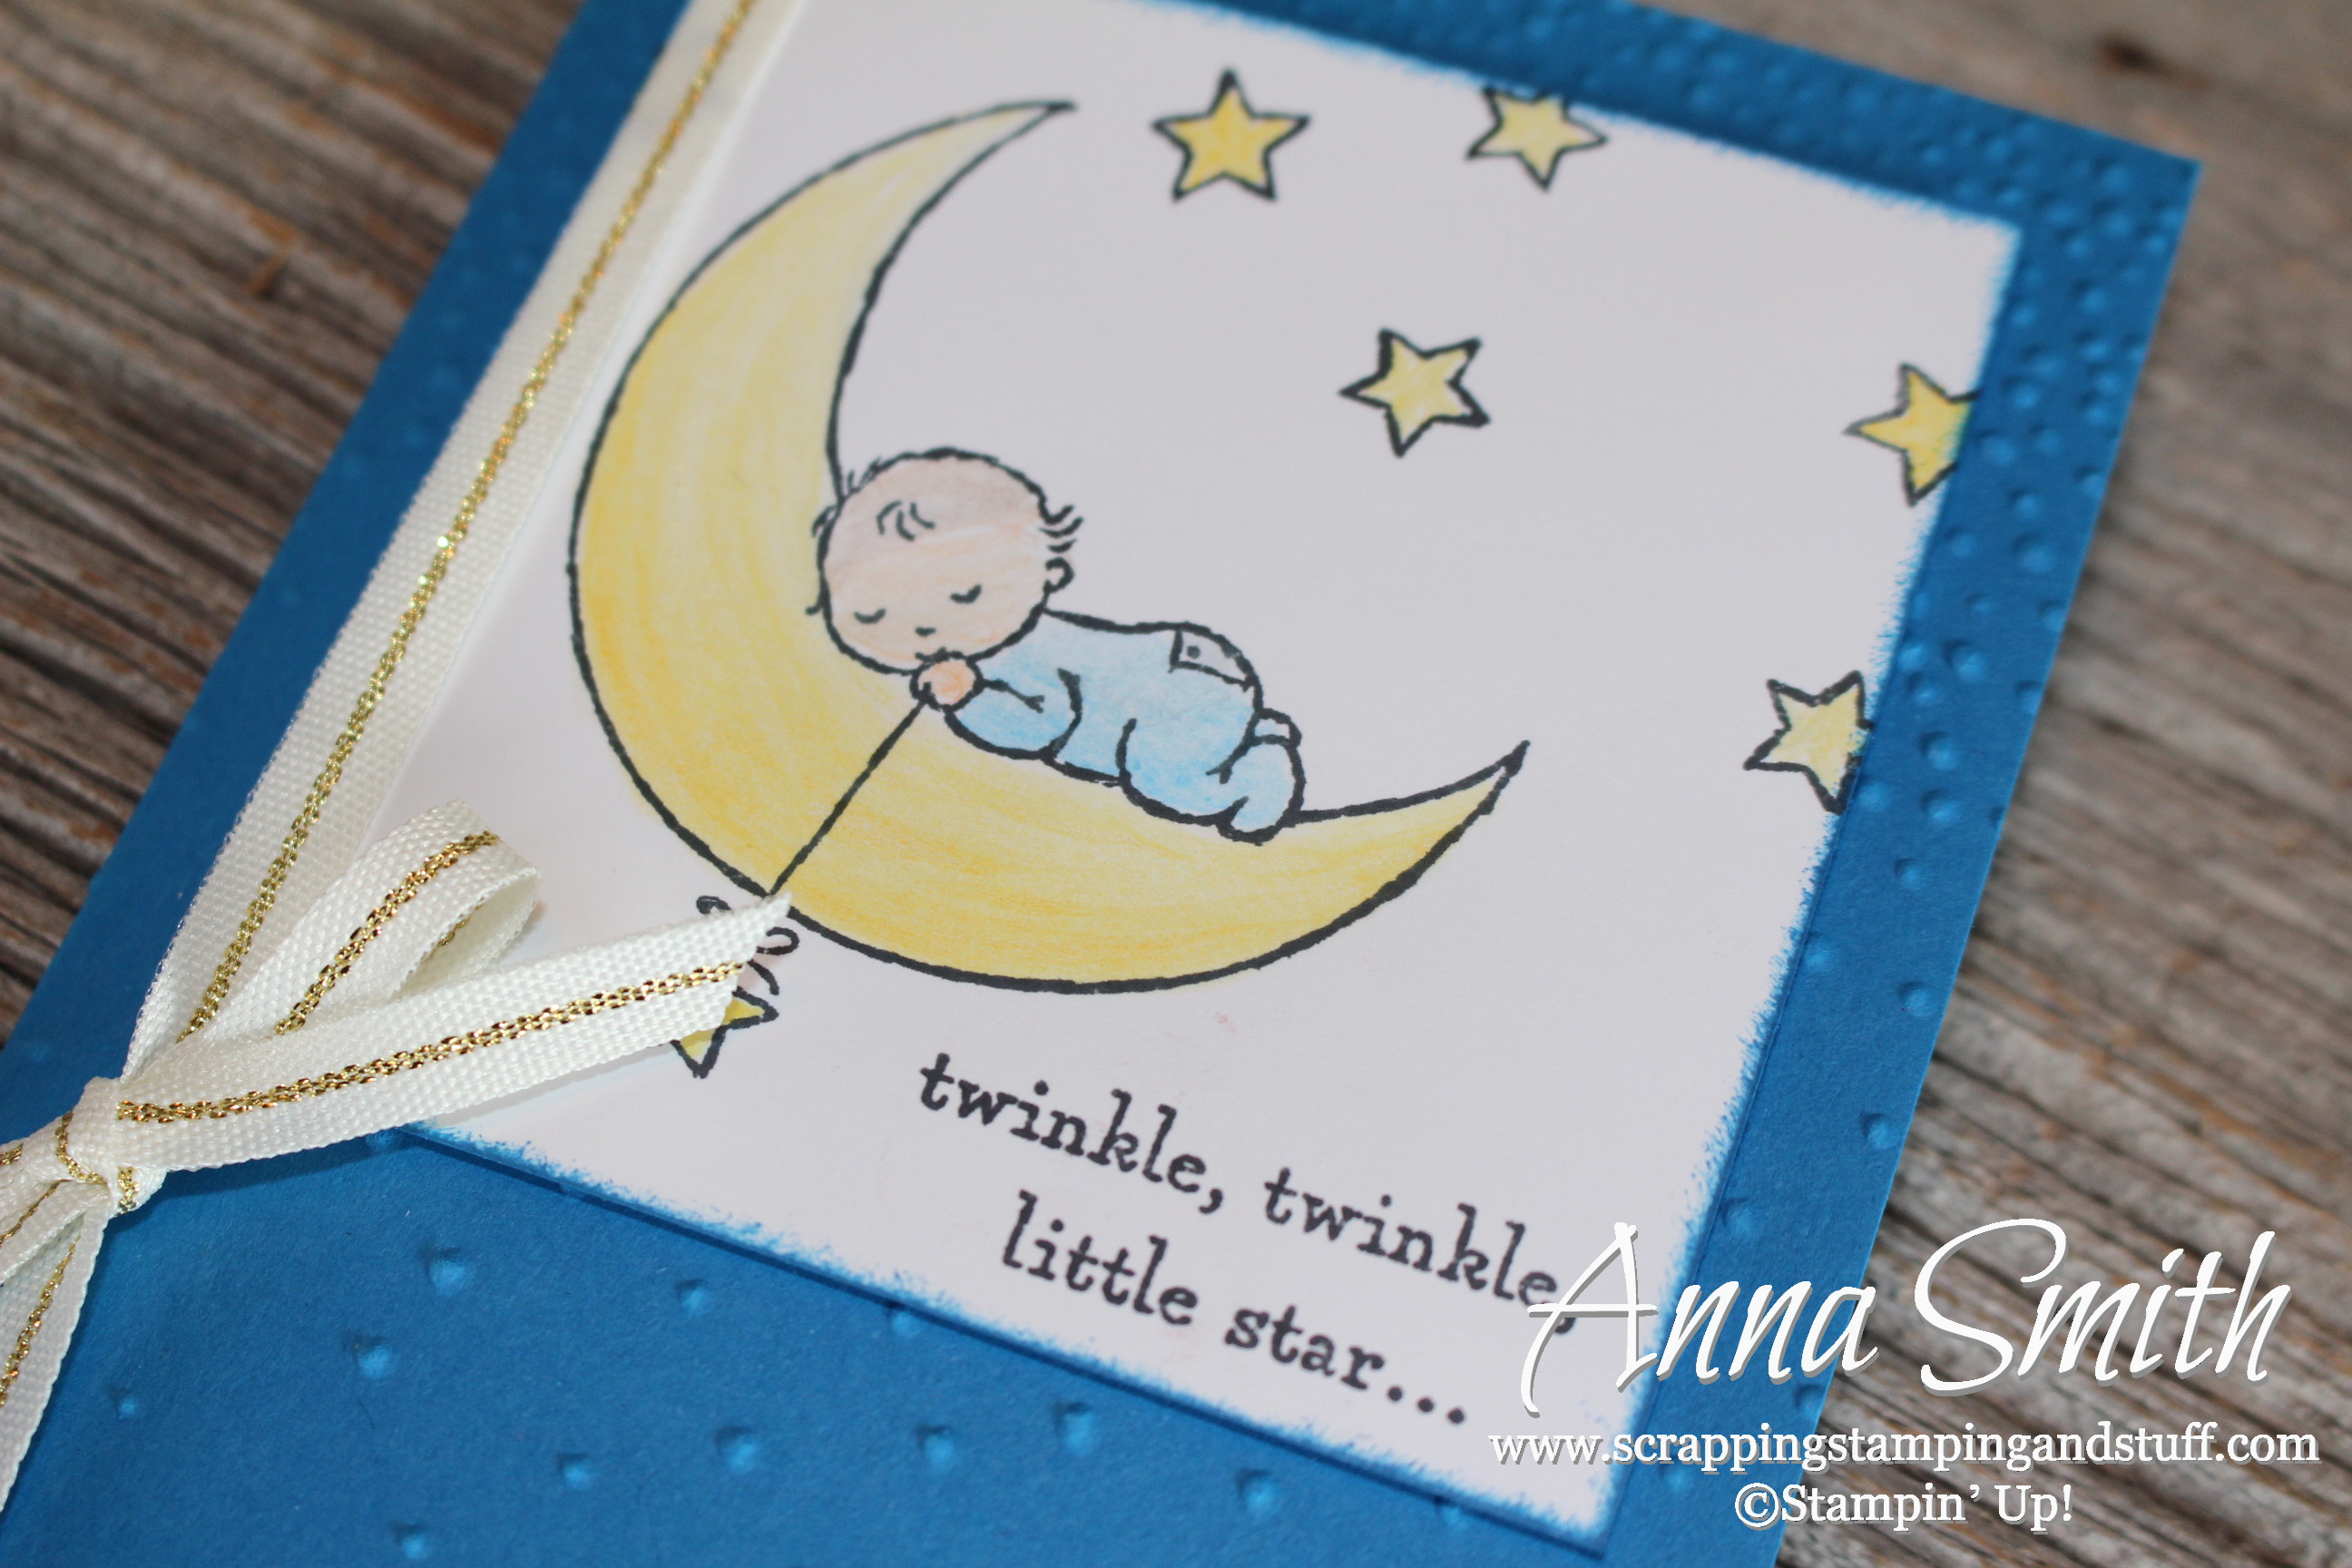 Twinkle twinkle little star baby card made with the Stampin' Up! Moon Baby stamp set, Softly Falling embossing folder and watercolor pencils